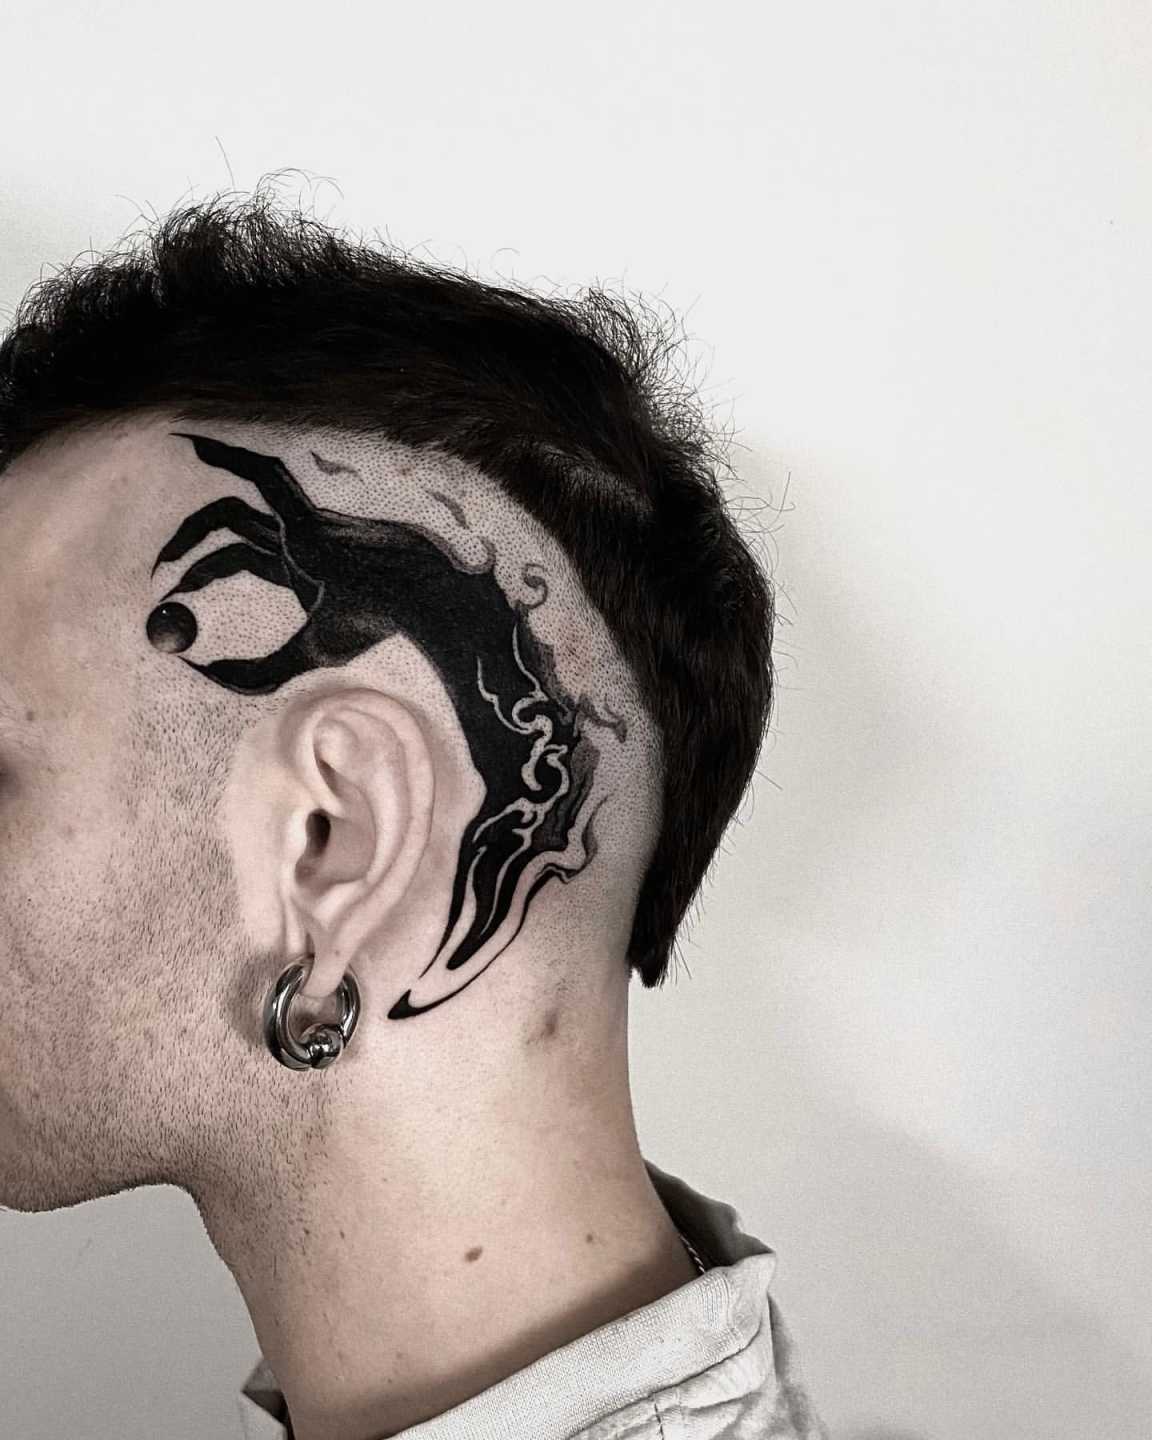 Phenomenal Behind the Ear Tattoos for Men in